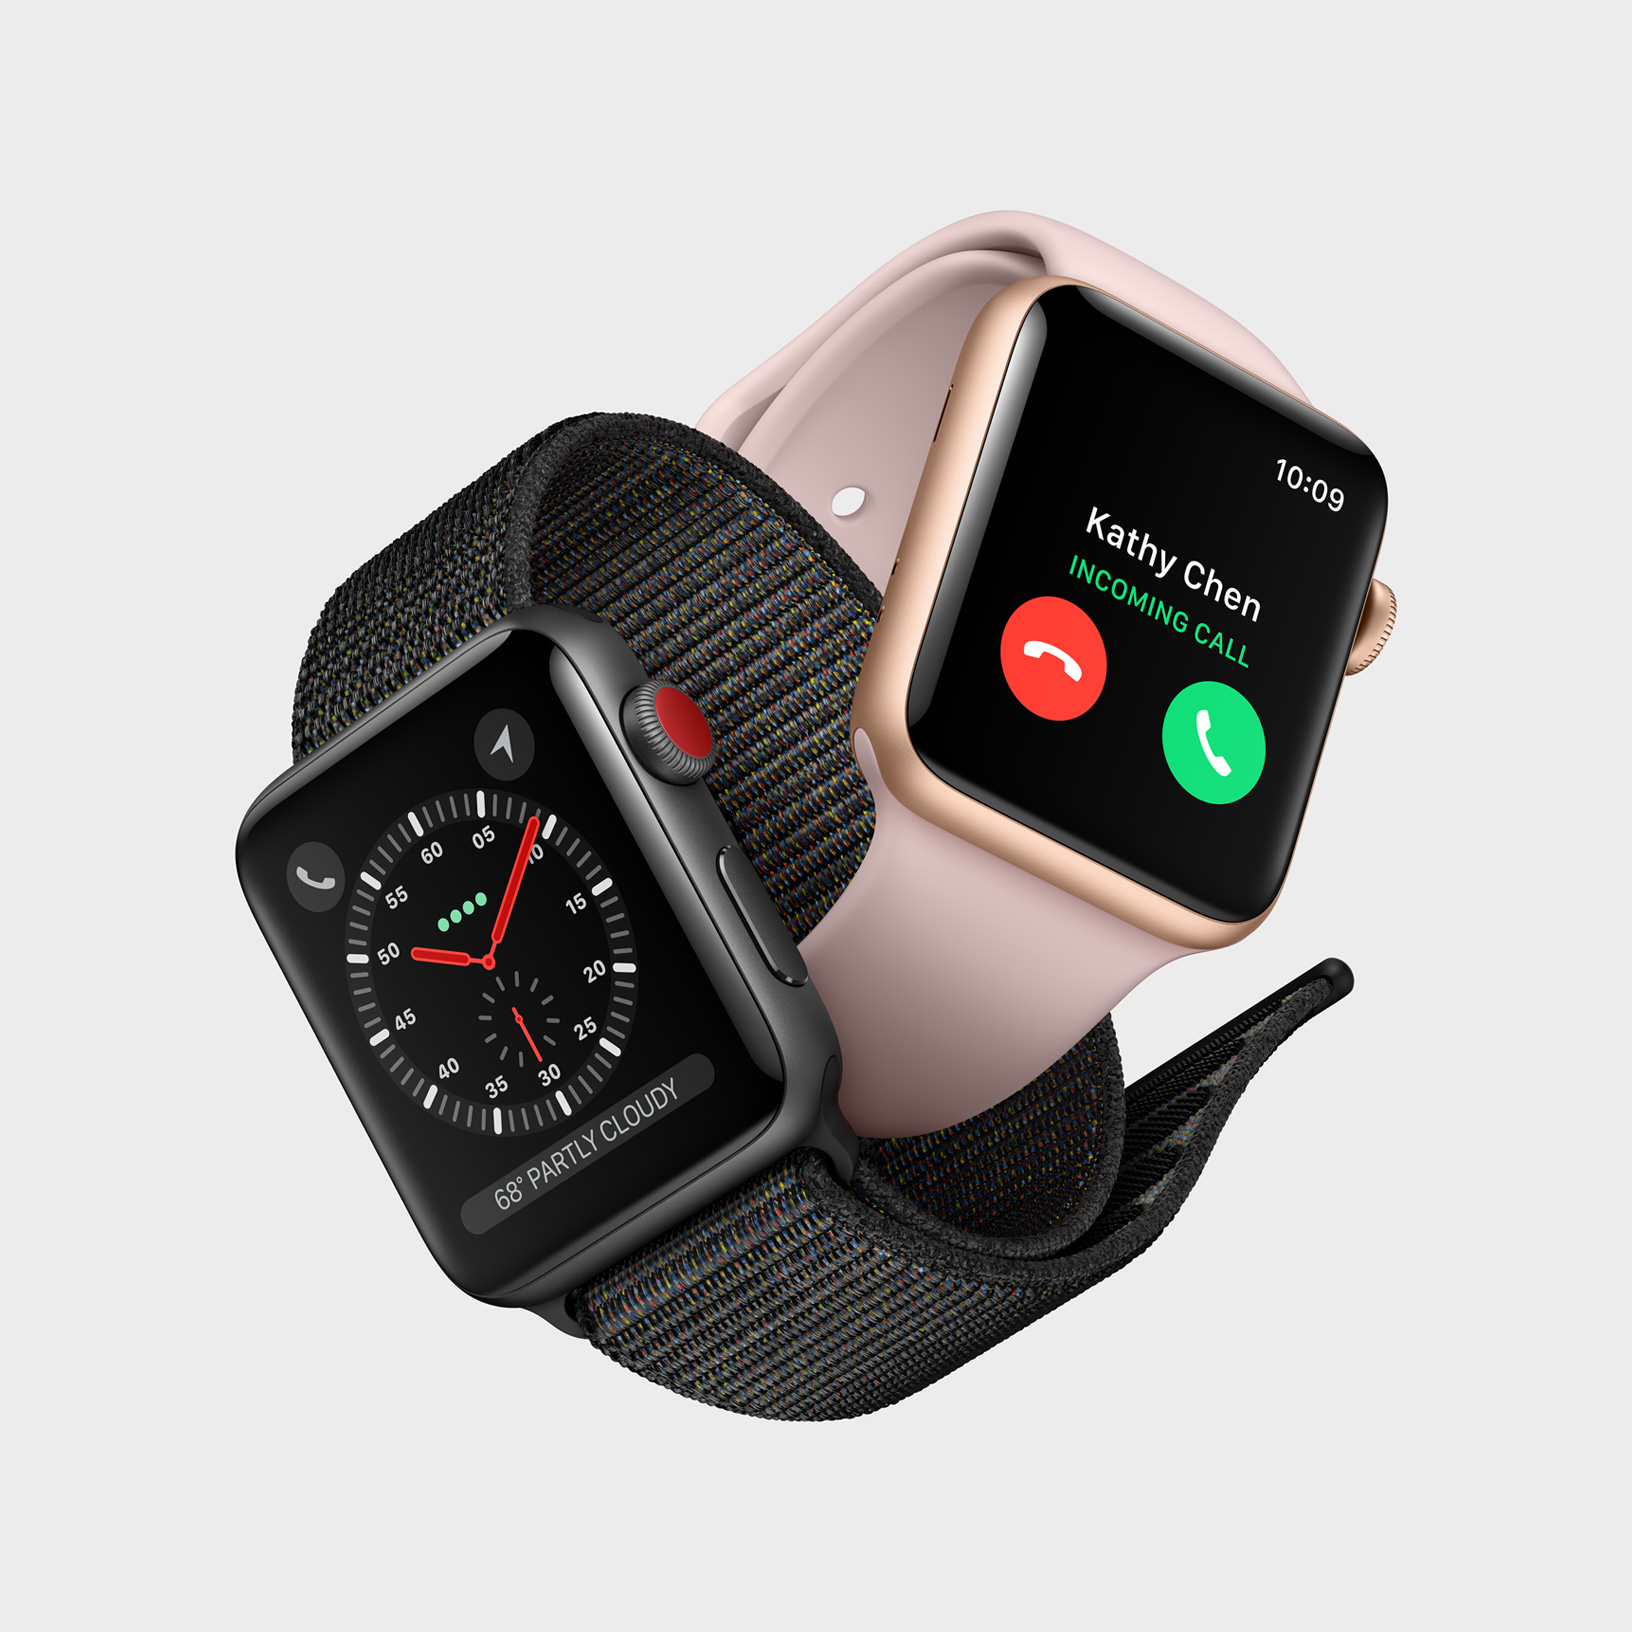 Media asset in full size related to 3dfxzone.it news item entitled as follows: Apple introduce i Watch Serie 3 con CPU dual-core, connettivit LTE e watchOS 4 | Image Name: news27030_Apple-Watch-Serie-3_1.jpg